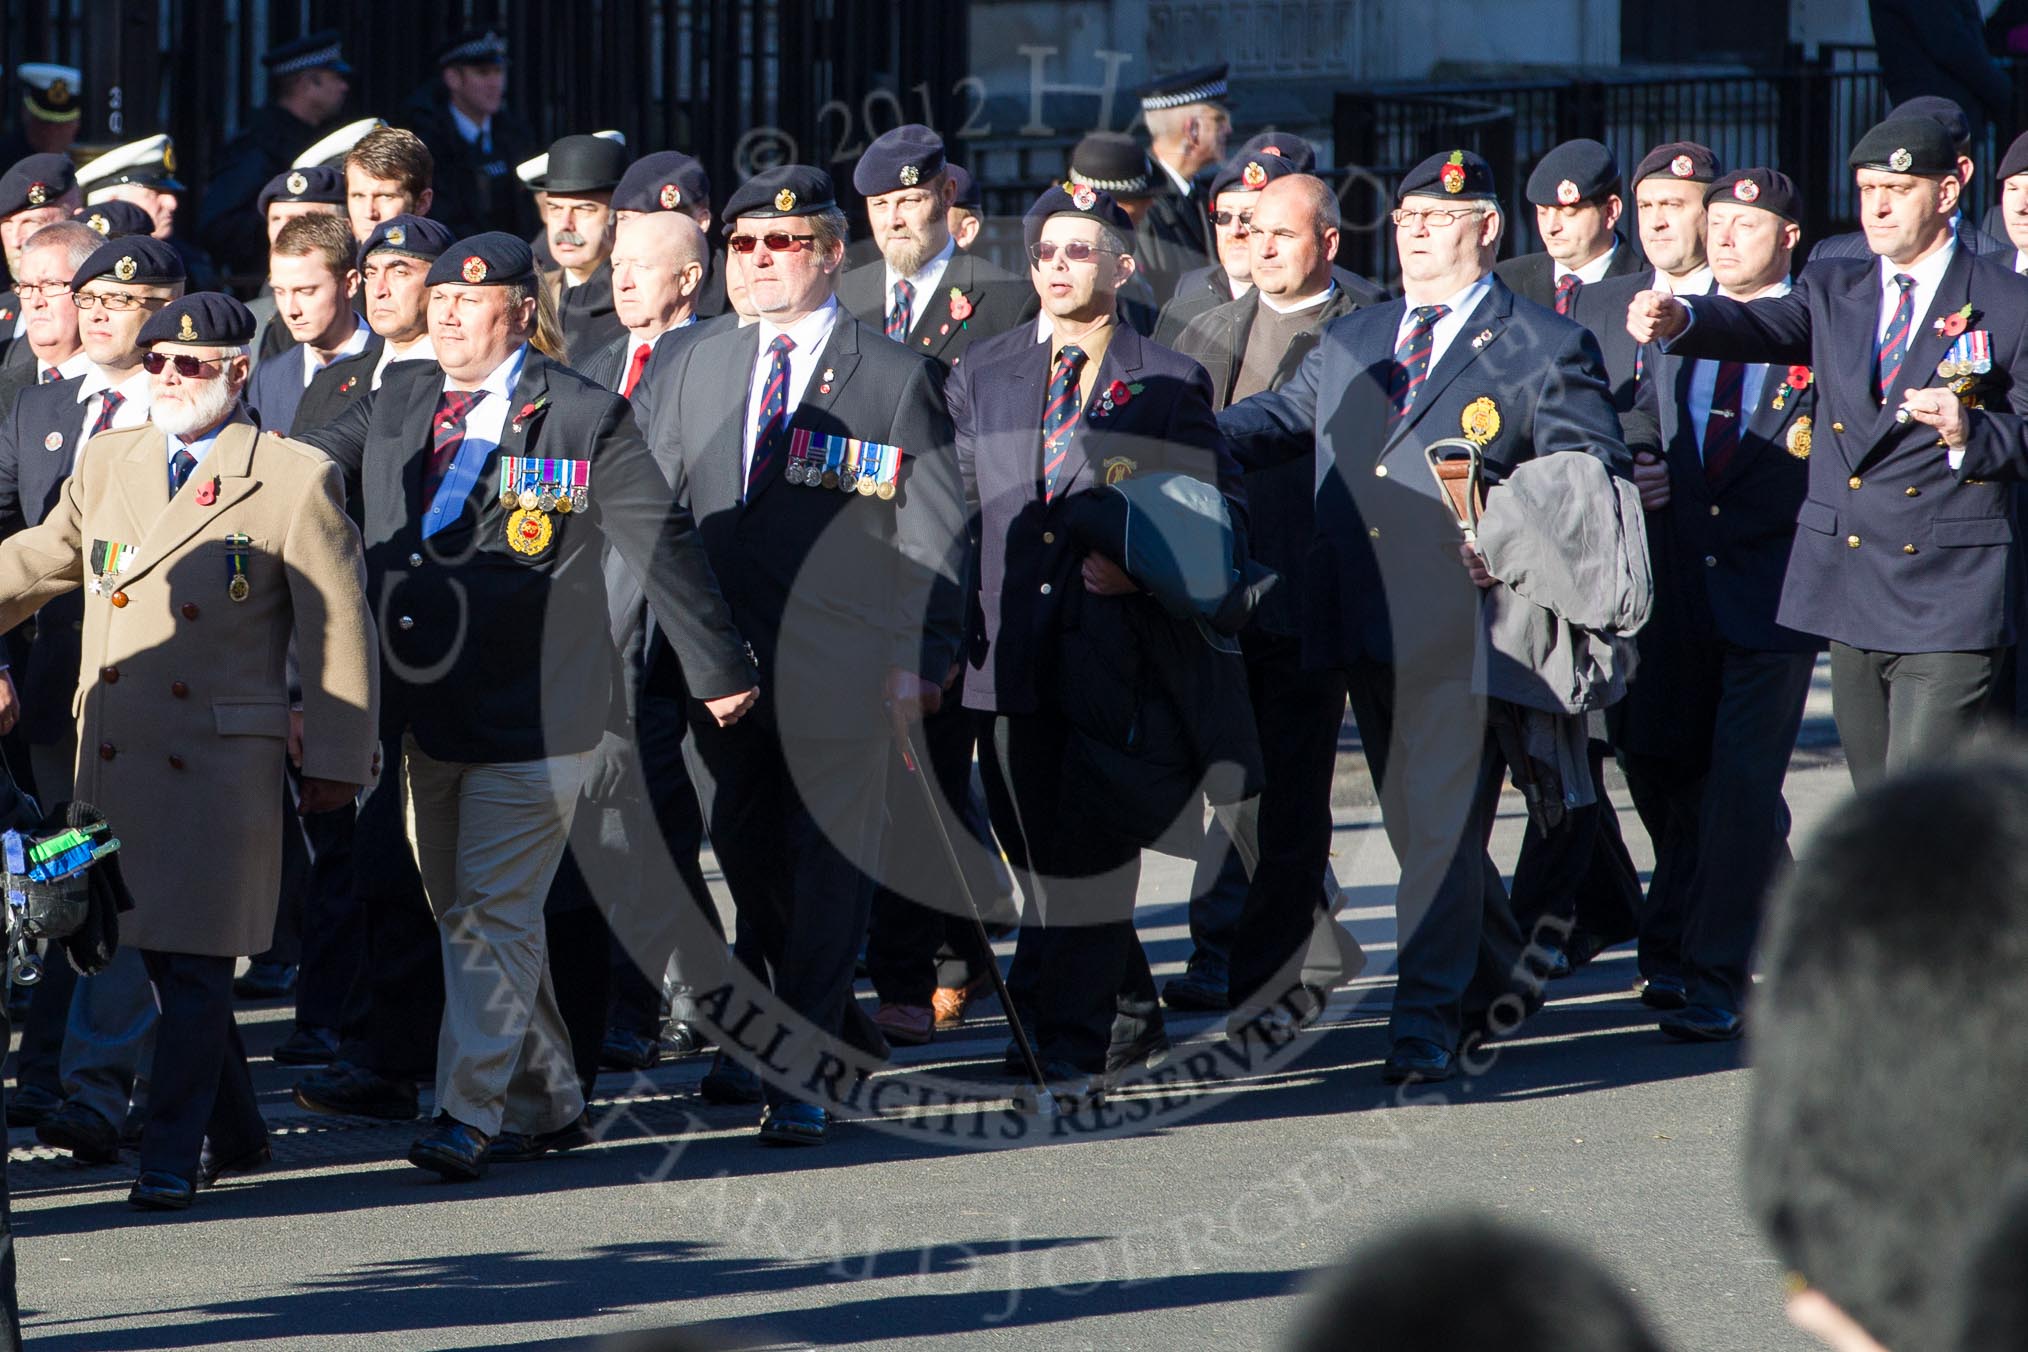 Remembrance Sunday 2012 Cenotaph March Past: Group B27 - Royal Engineers Bomb Disposal Association..
Whitehall, Cenotaph,
London SW1,

United Kingdom,
on 11 November 2012 at 11:59, image #986